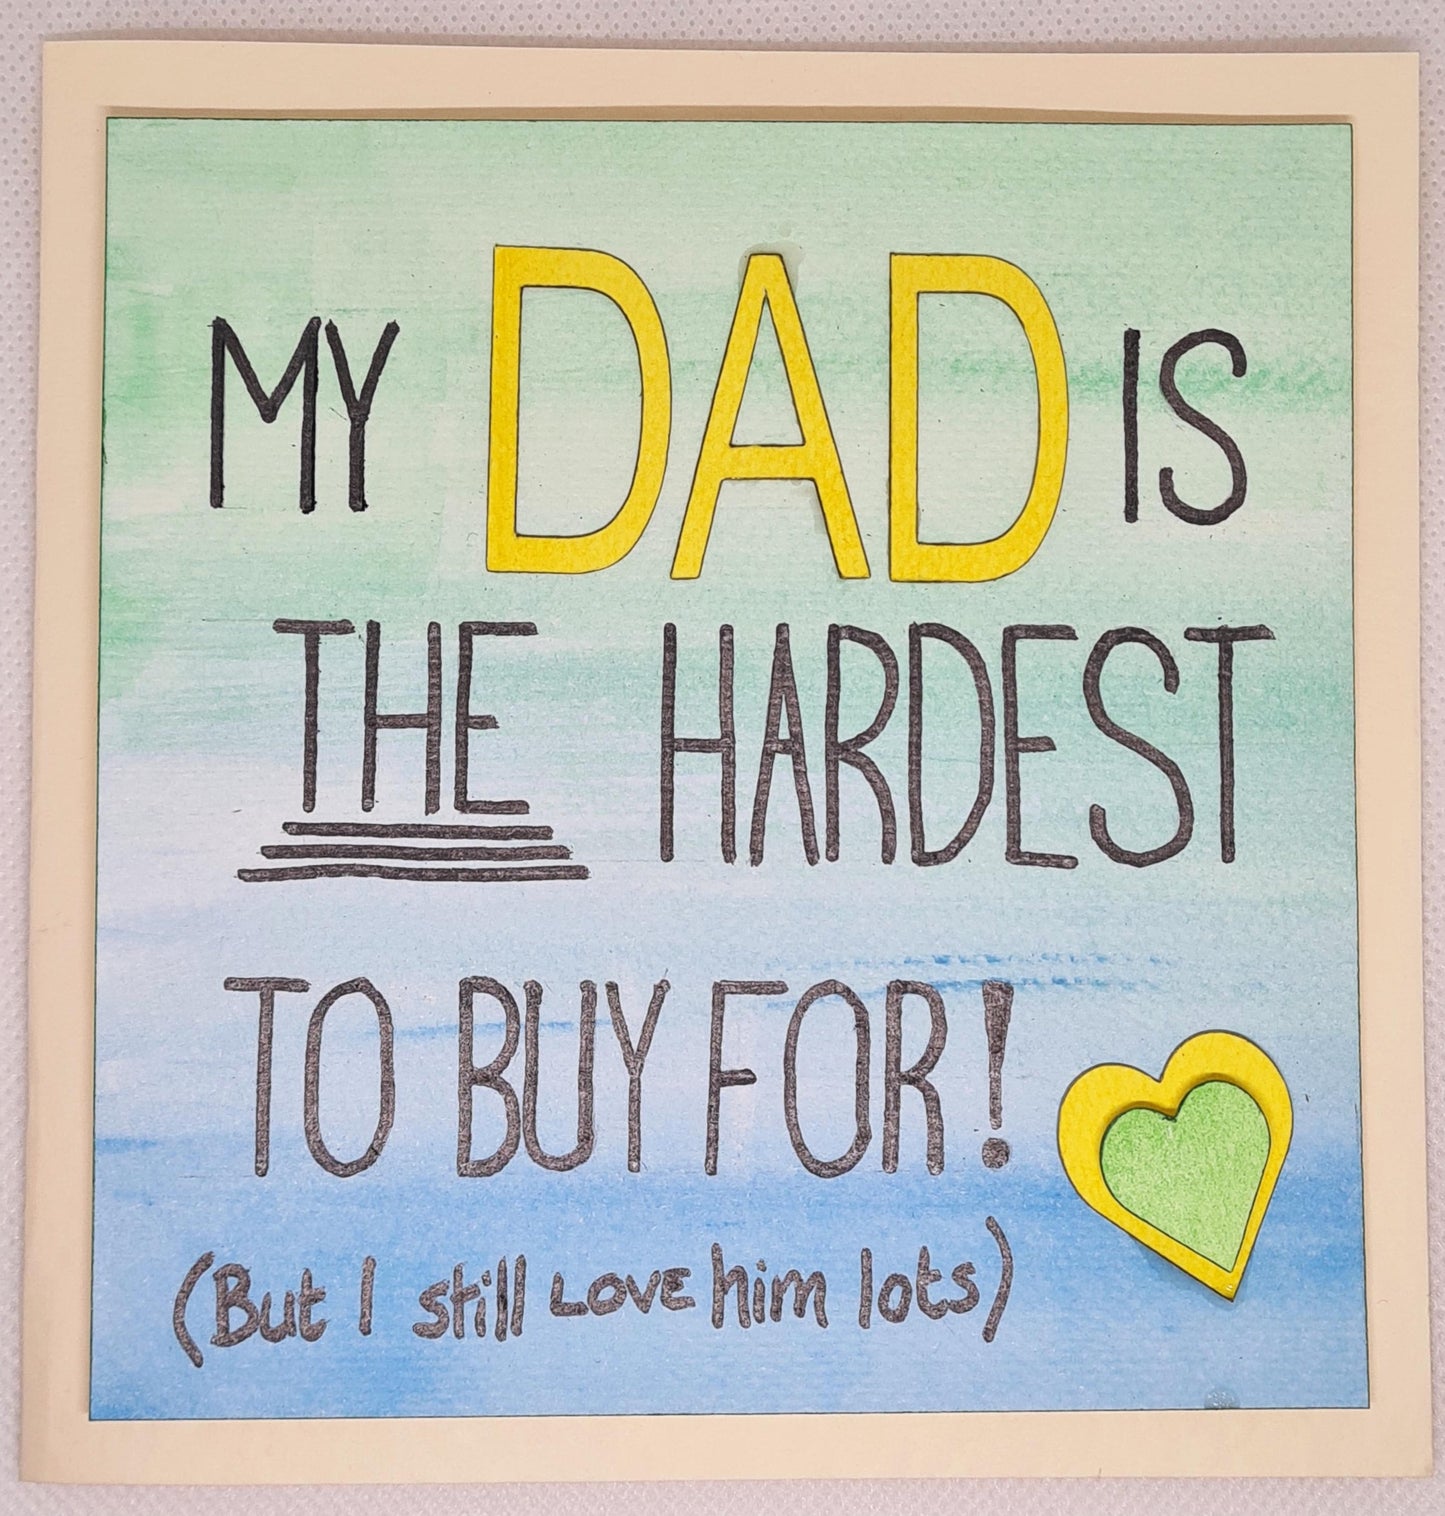 These personalised cards are ideal gifts for dad's bday. They are also perfect for Fathers Day. We are positive that your father will LOVE THIS!